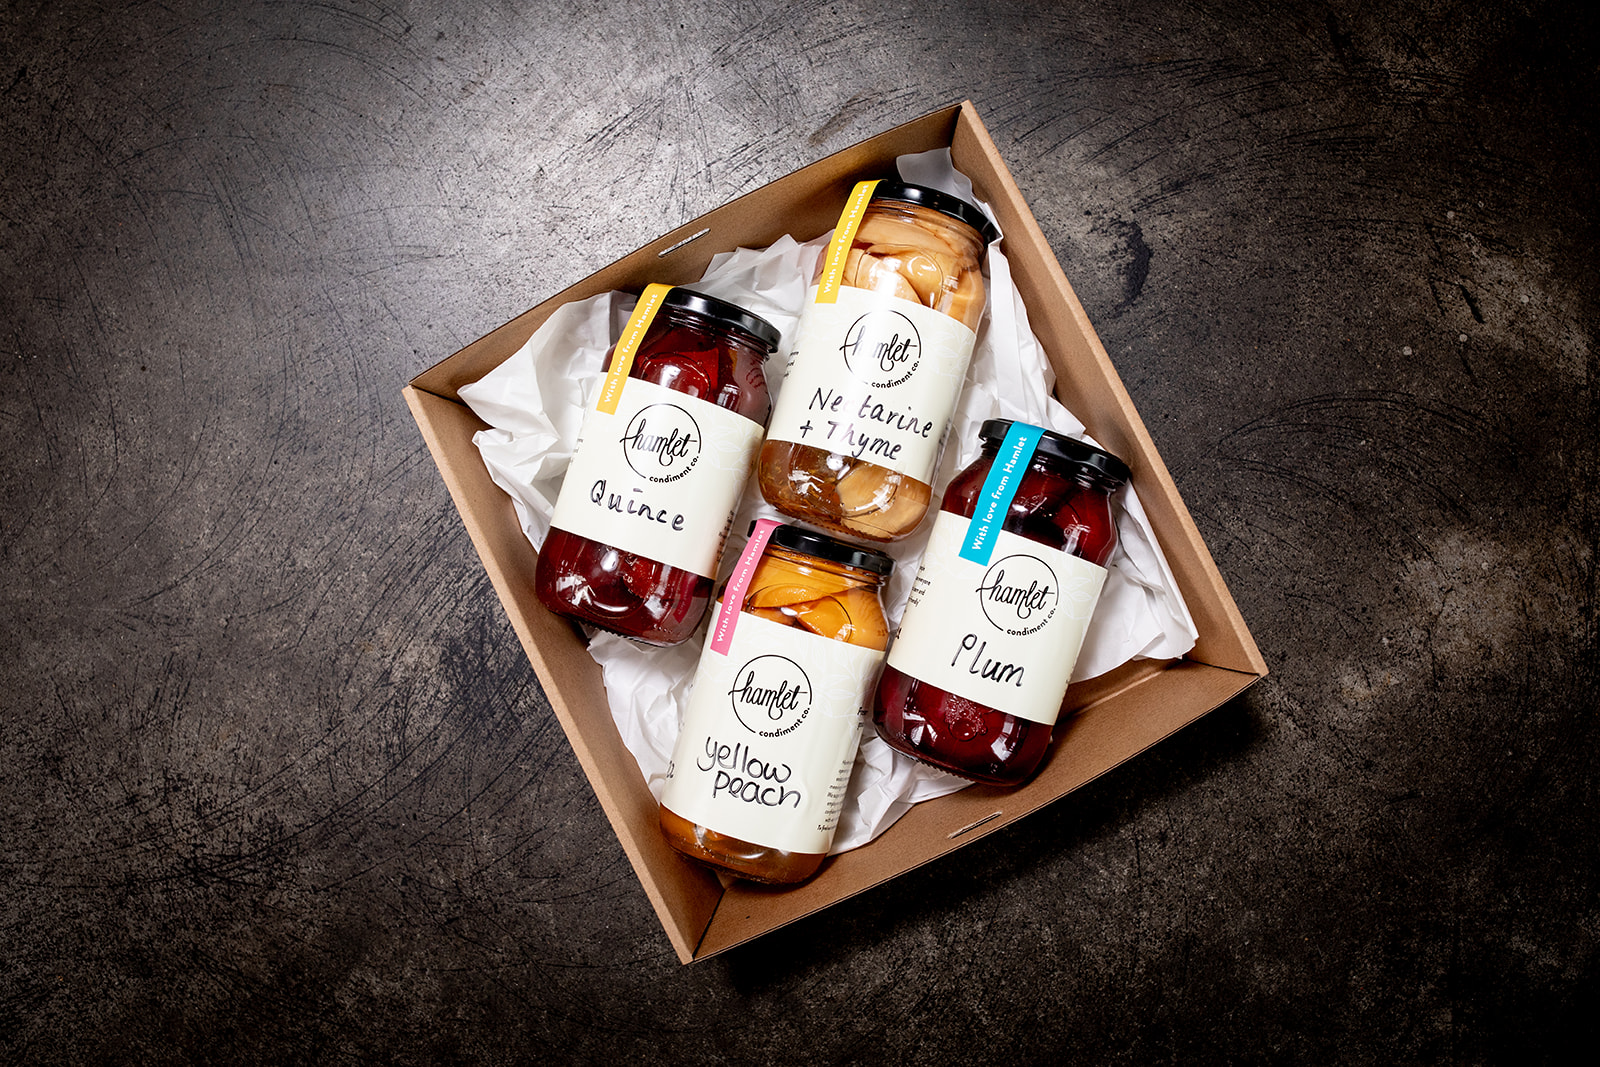 A hamper containing jars of Hamlet's Quince, Nectarine and Thyme, Plum, and Yellow Peach poached fruit preserves.